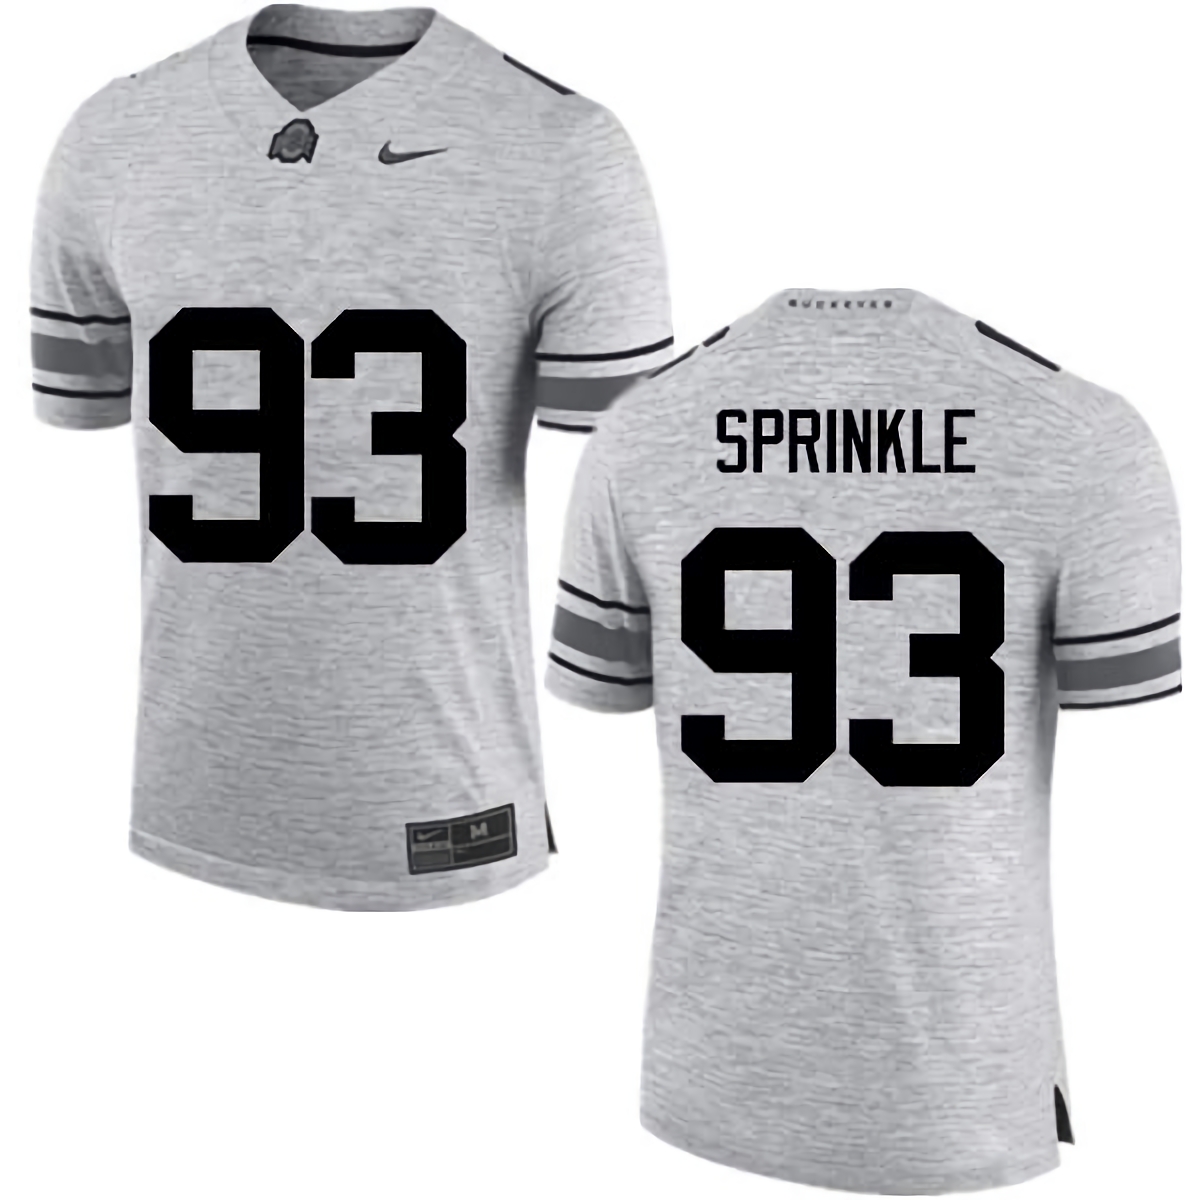 Tracy Sprinkle Ohio State Buckeyes Men's NCAA #93 Nike Gray College Stitched Football Jersey LJL2356NI